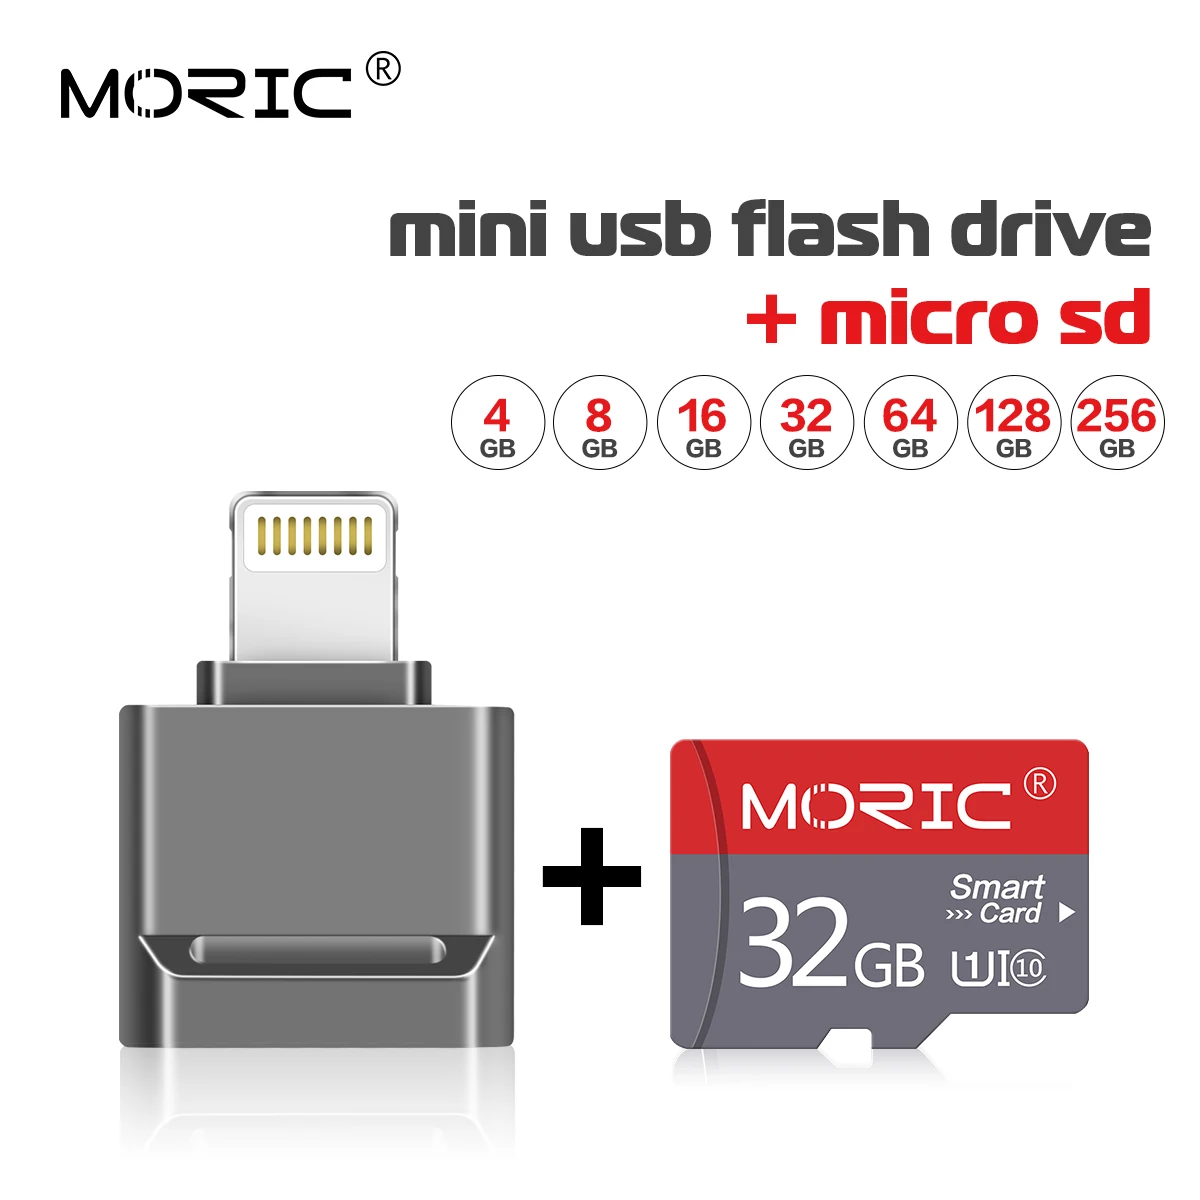 moric fashion mini new usb flash drive pendrive for iphone 77plus8x usbotglightning 2 in 1 pen drive for ios external free global shipping